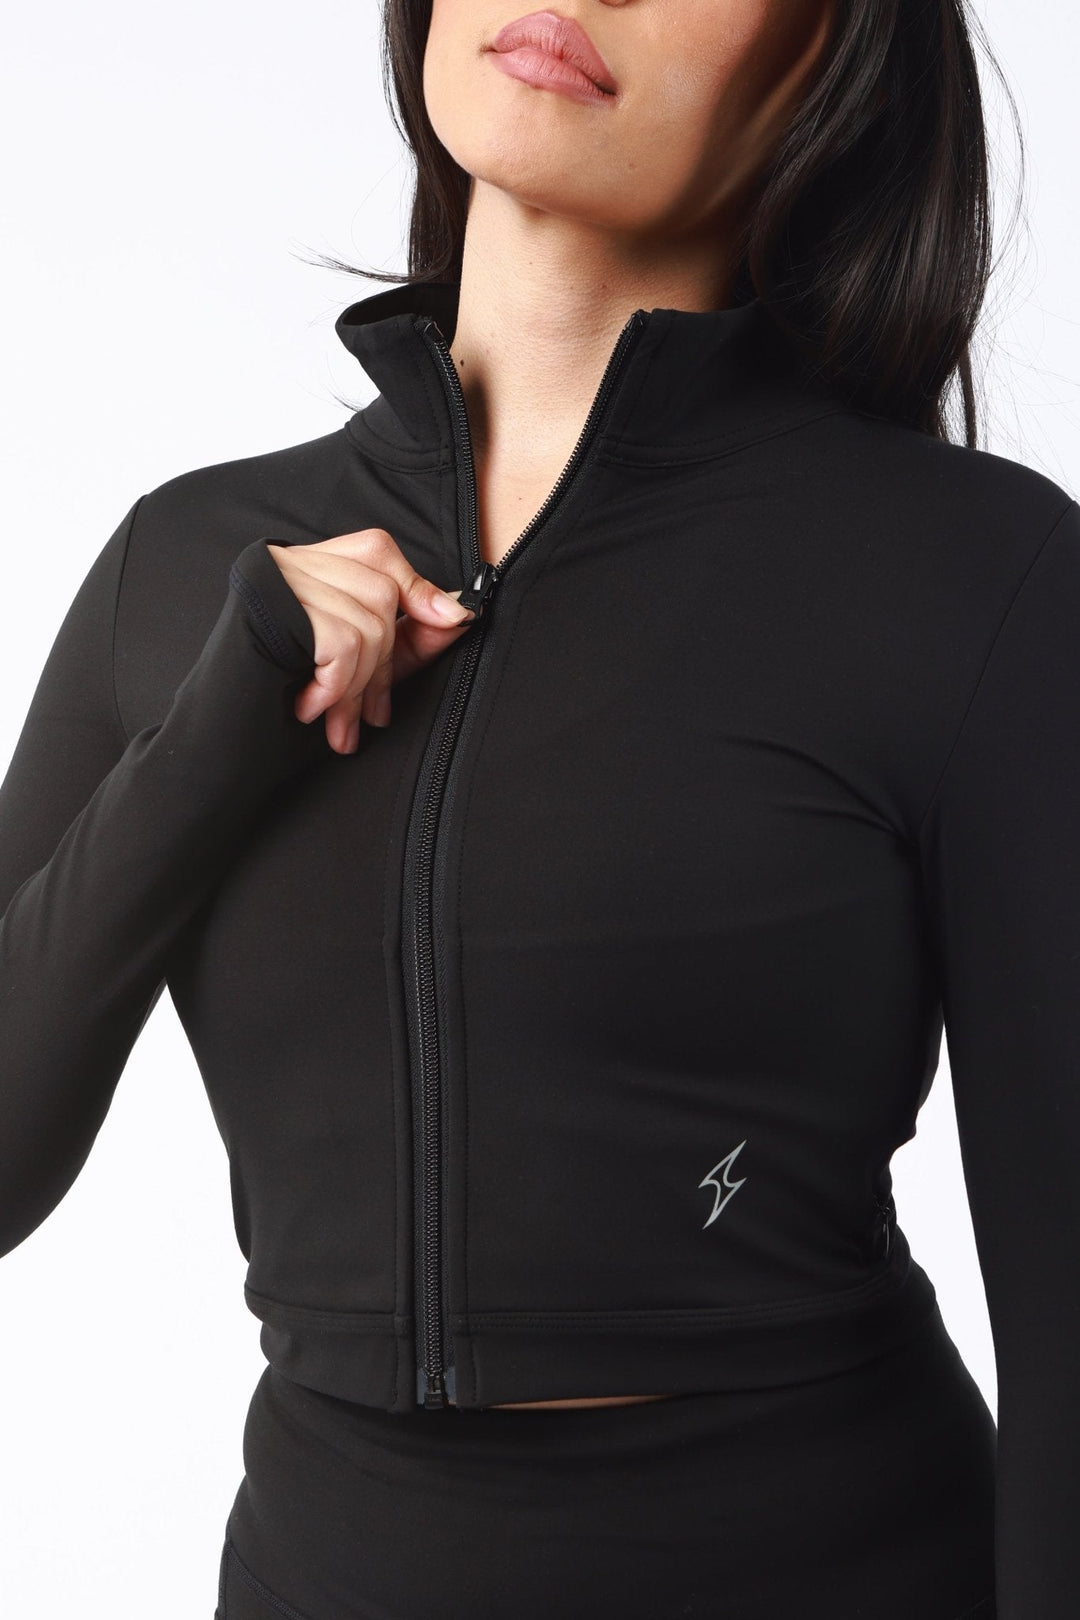 Athletic Women's Jacket With Pockets In Black - attivousa Free Shipping over $75 Womens Activewear Attivo